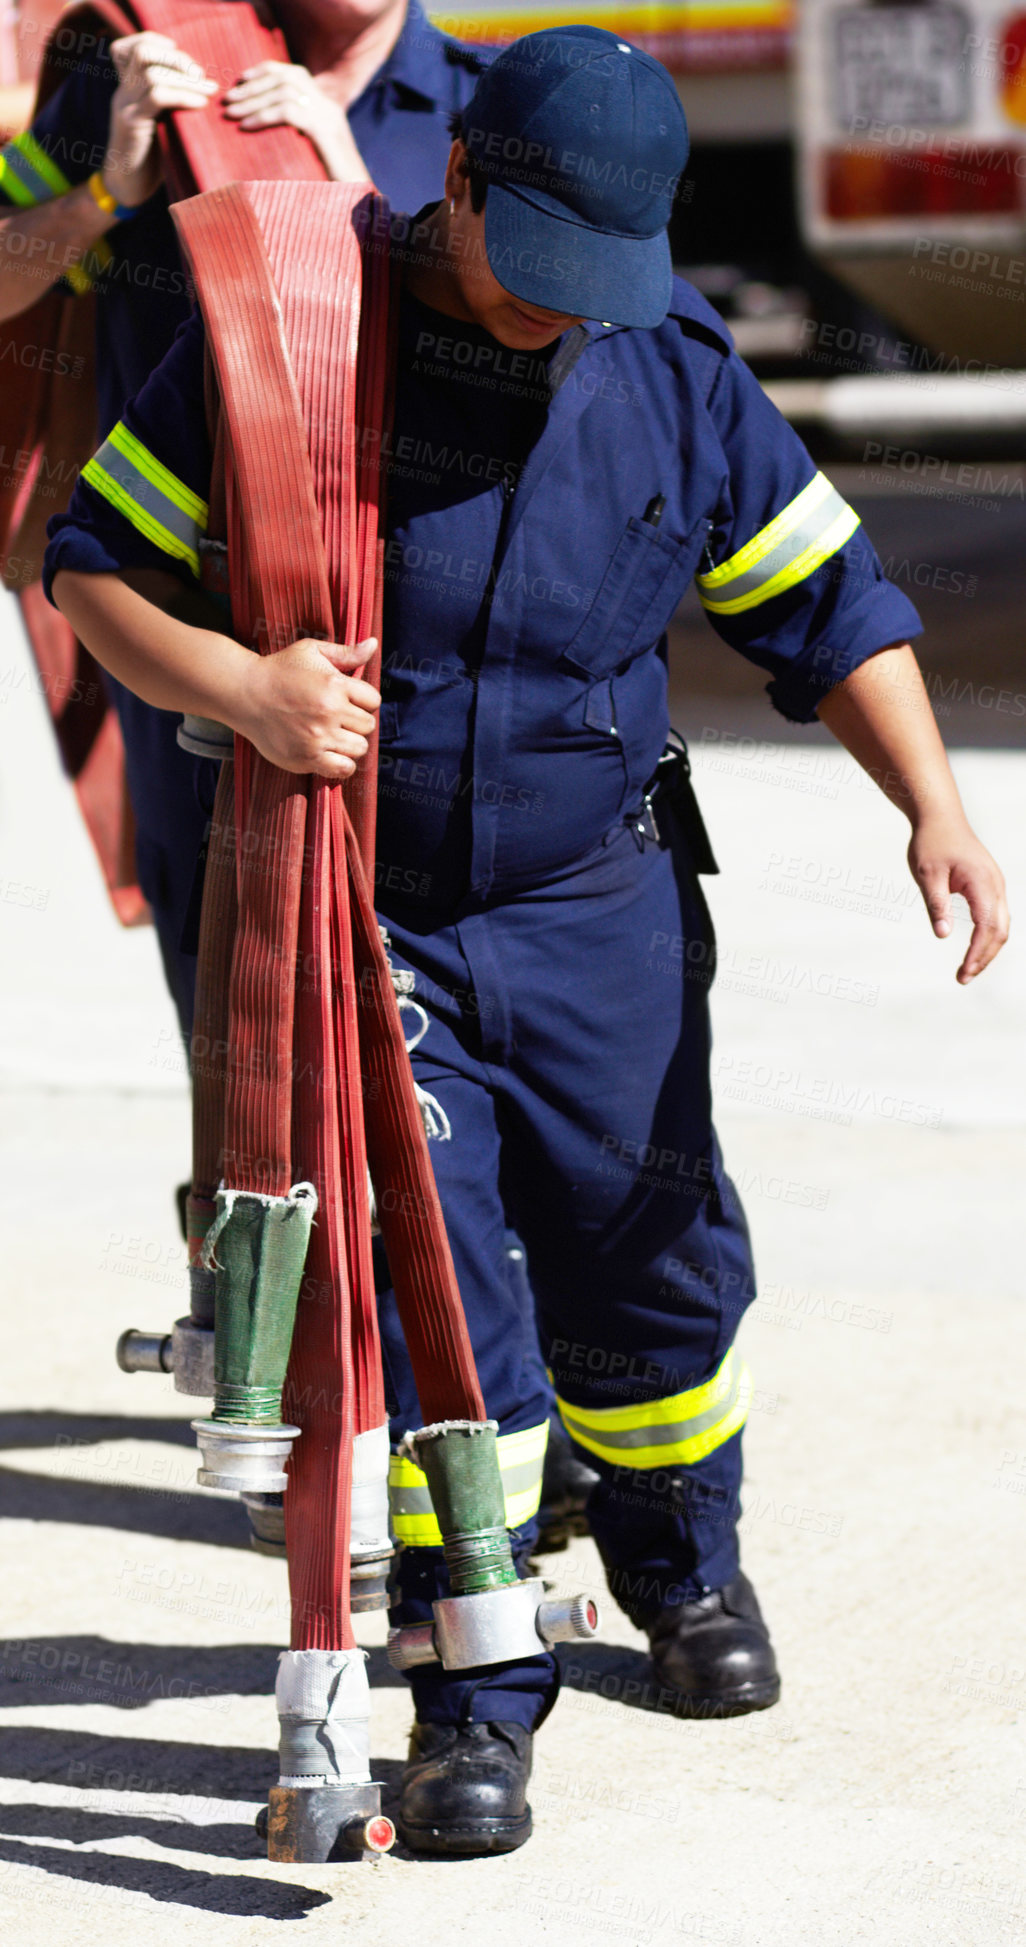 Buy stock photo Firefighter, team and carrying hoses for emergency, rescue or fire drill from truck outdoors. Firefighters working together in practice lifting big liquid pressure pipes outside station or department